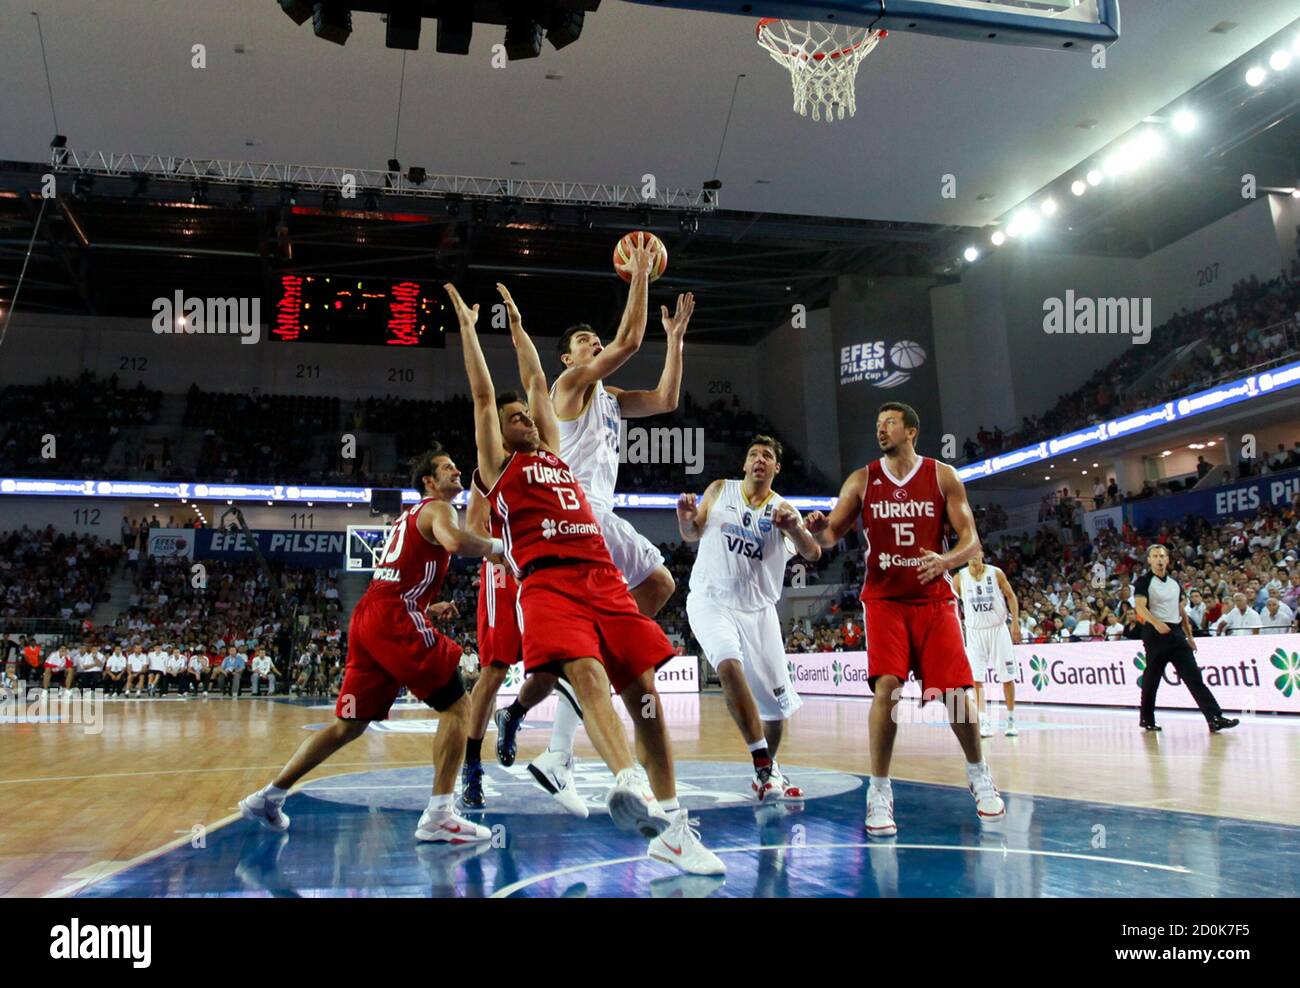 Carlos Delfino (C) of Argentina goes to the basket past Hidayet Turkoglu (R), Ender Arslan (2nd L) and Kerem Tunceri (L) of Turkey as Roman Gonzalez (2nd R) of Argentina follows during their FIBA exhibition basketball game in Ankara August 23, 2010. The FIBA World Championship will take place in Turkey from August 28 to September 12. REUTERS/Umit Bektas (TURKEY - Tags: SPORT BASKETBALL) Stock Photo